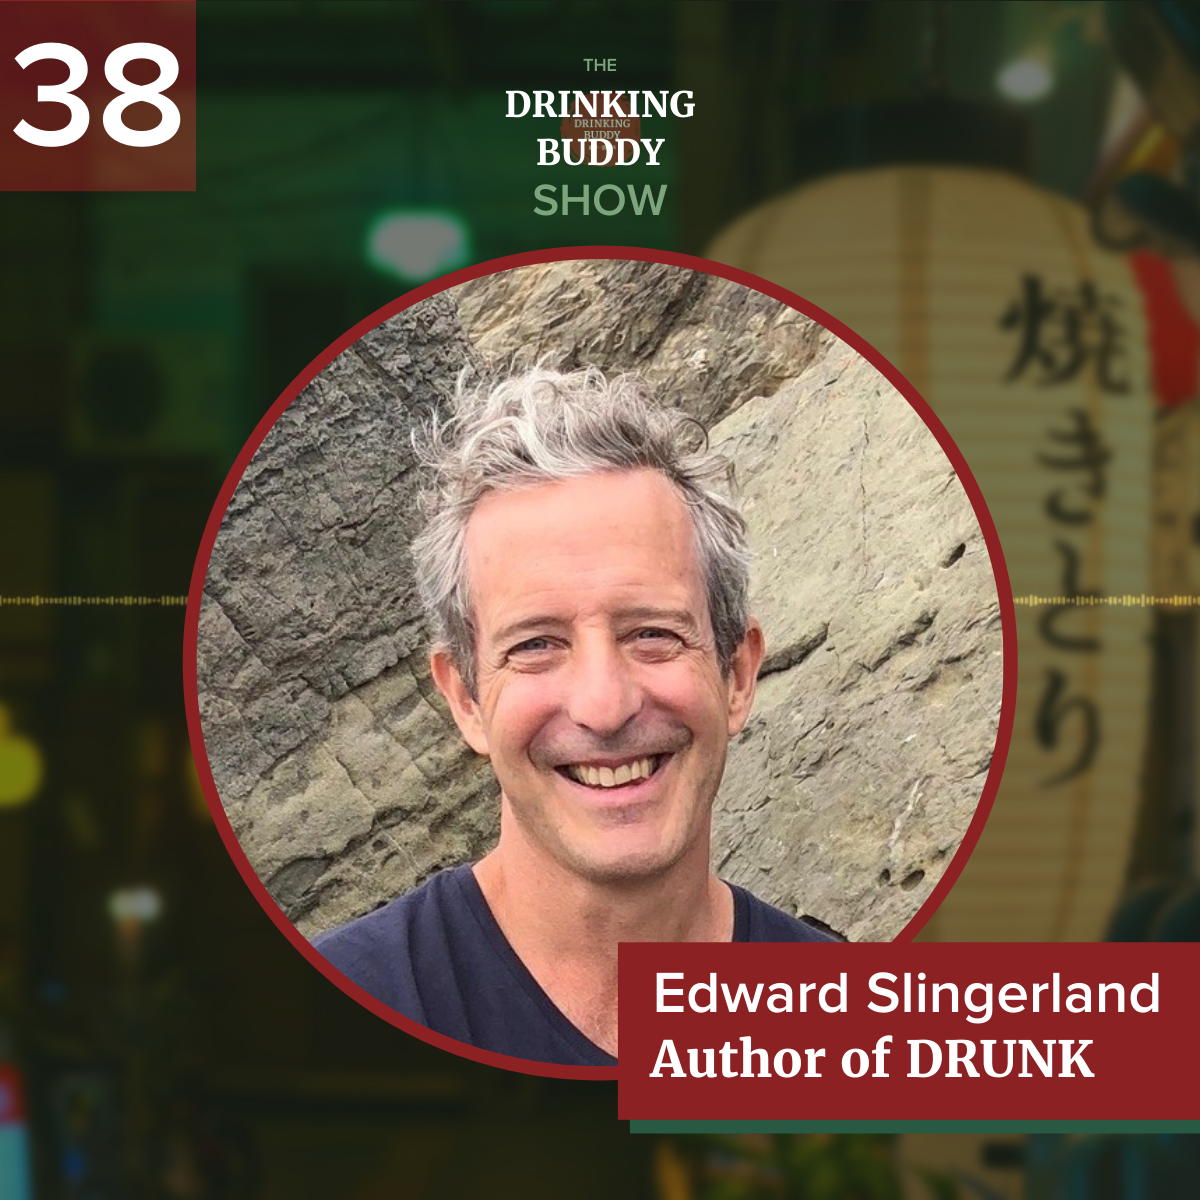 The Drinking Buddy Show Episode 38: Why We Love to Get Drunk with Edward Slingerland